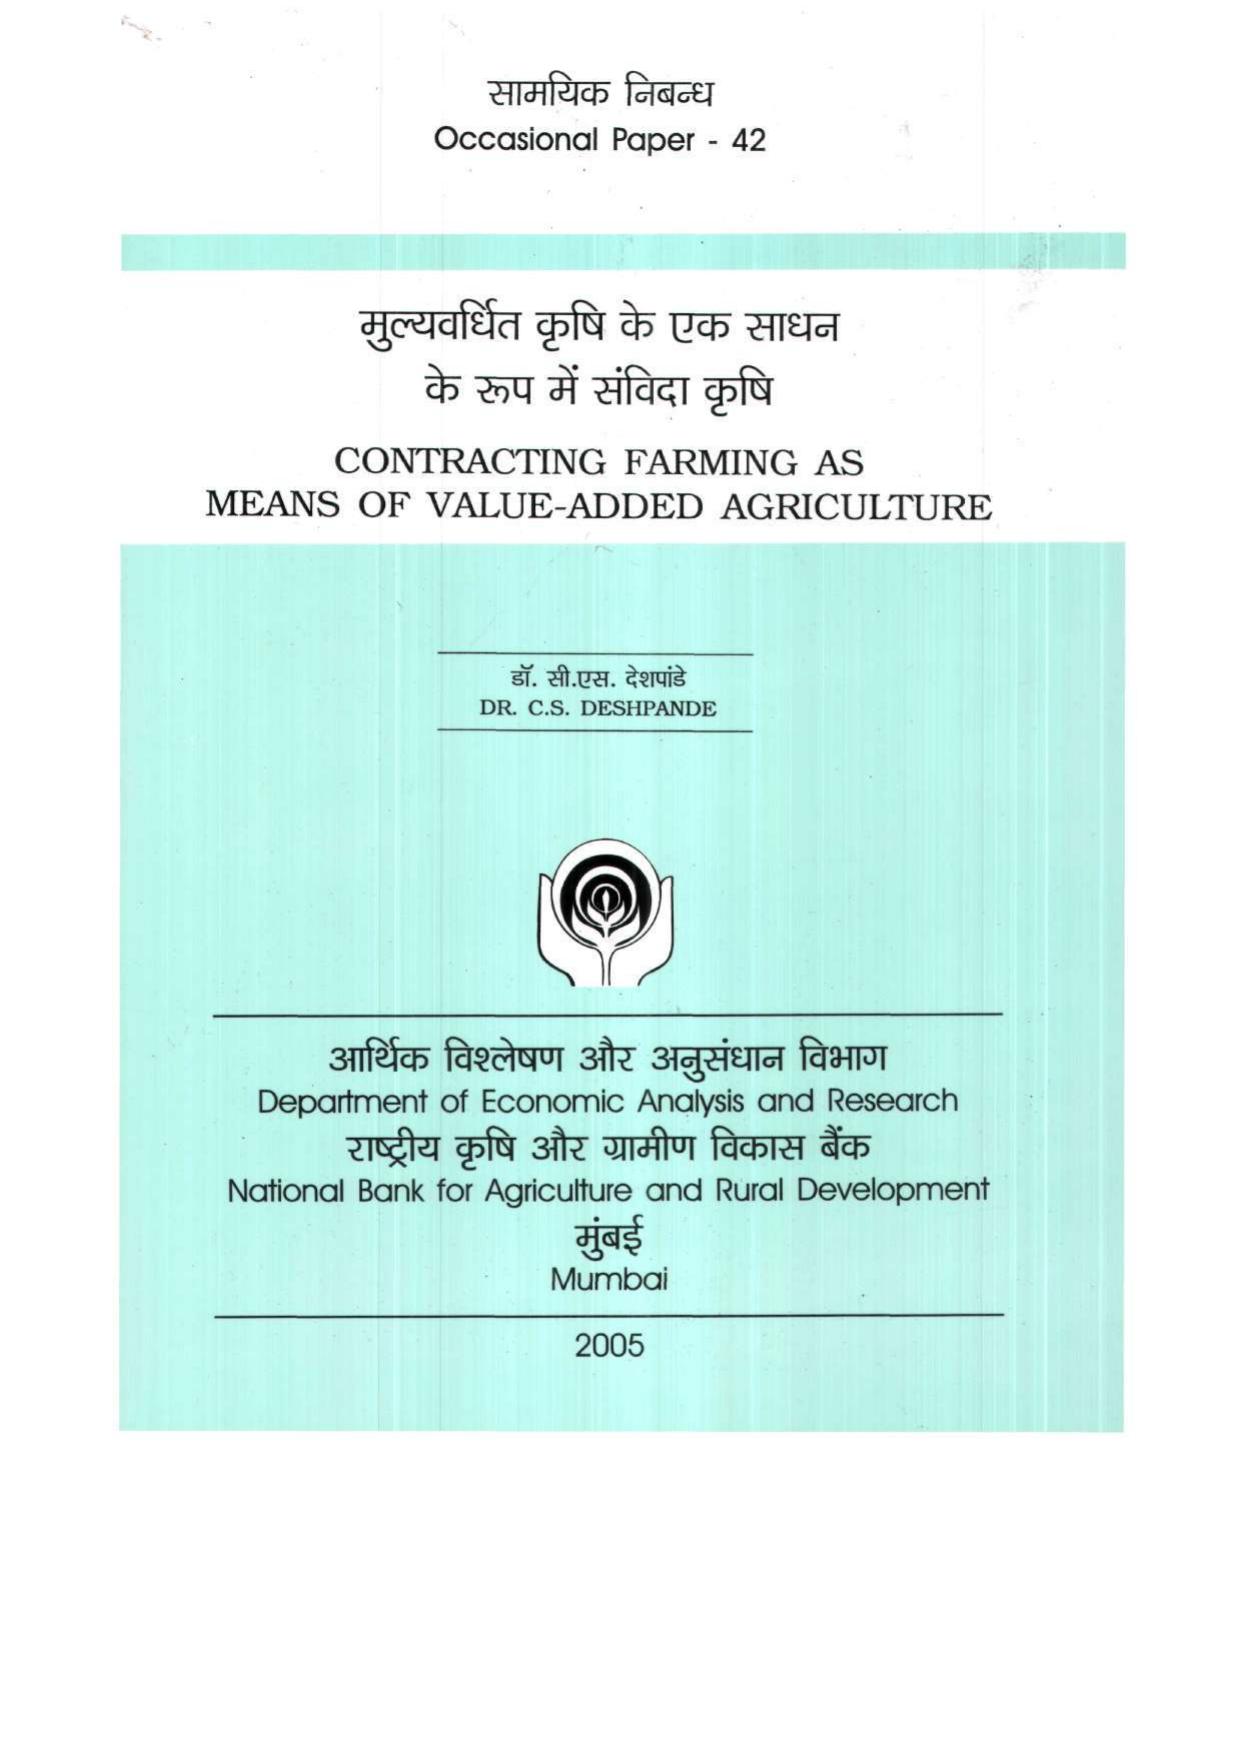 CONTRACTING FARMING AS MEANS OF VALUE-ADDED AGRICULTURE 2005